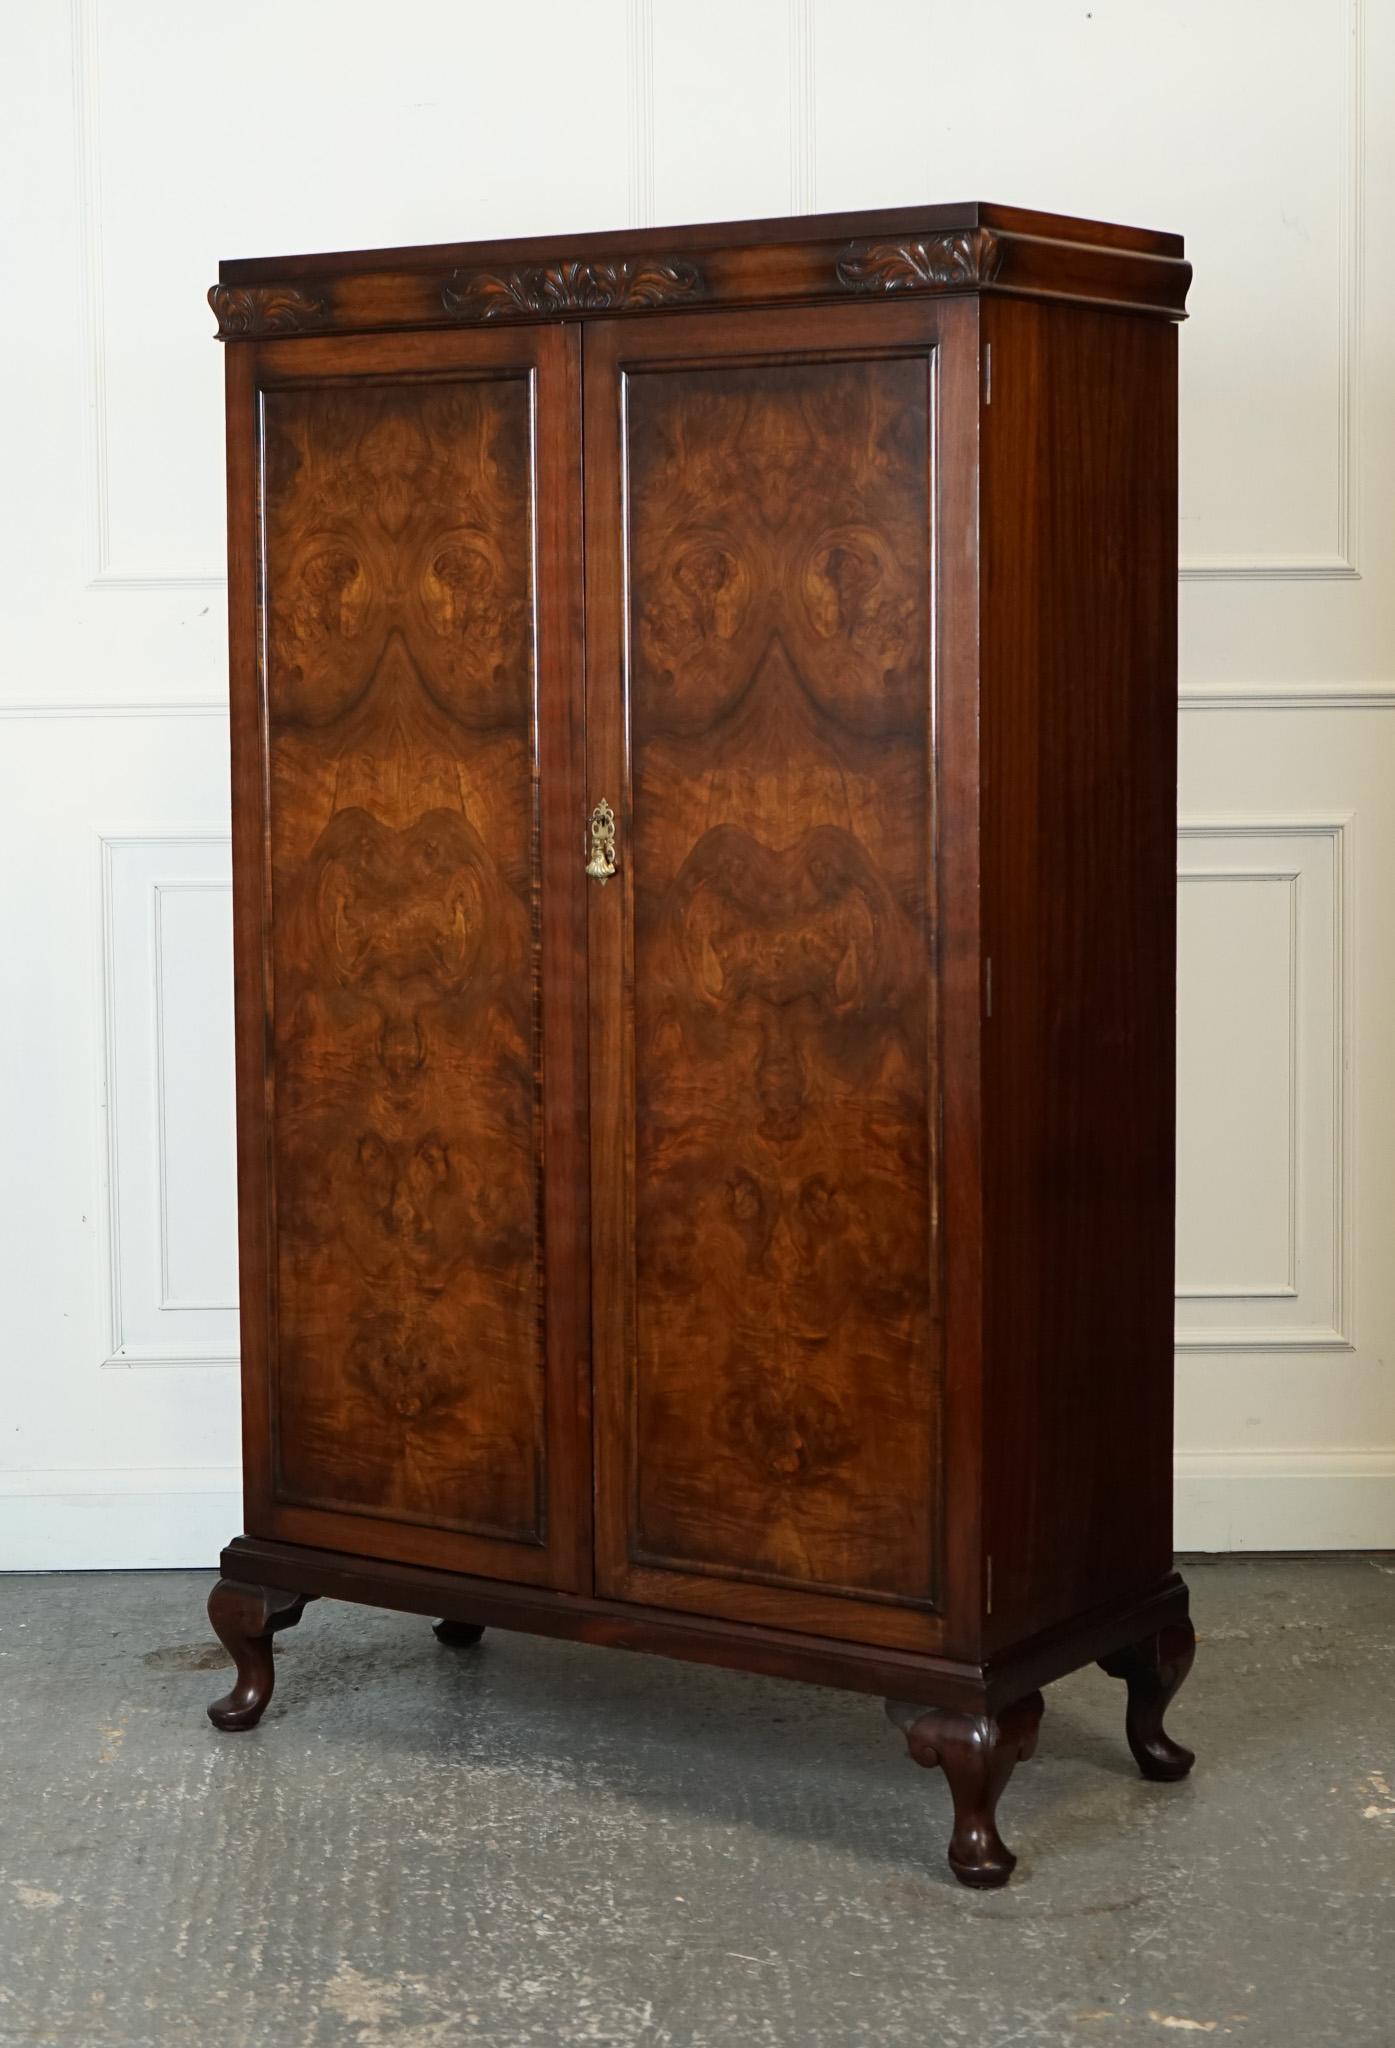 

We are delighted to offer for sale this Exquisite 1920's Waring & Gillow Lancaster Burr Walnut Double Wardrobe.

 This is a fine example of luxurious craftsmanship from the Art Deco era. Crafted from high-quality burr walnut wood, this wardrobe